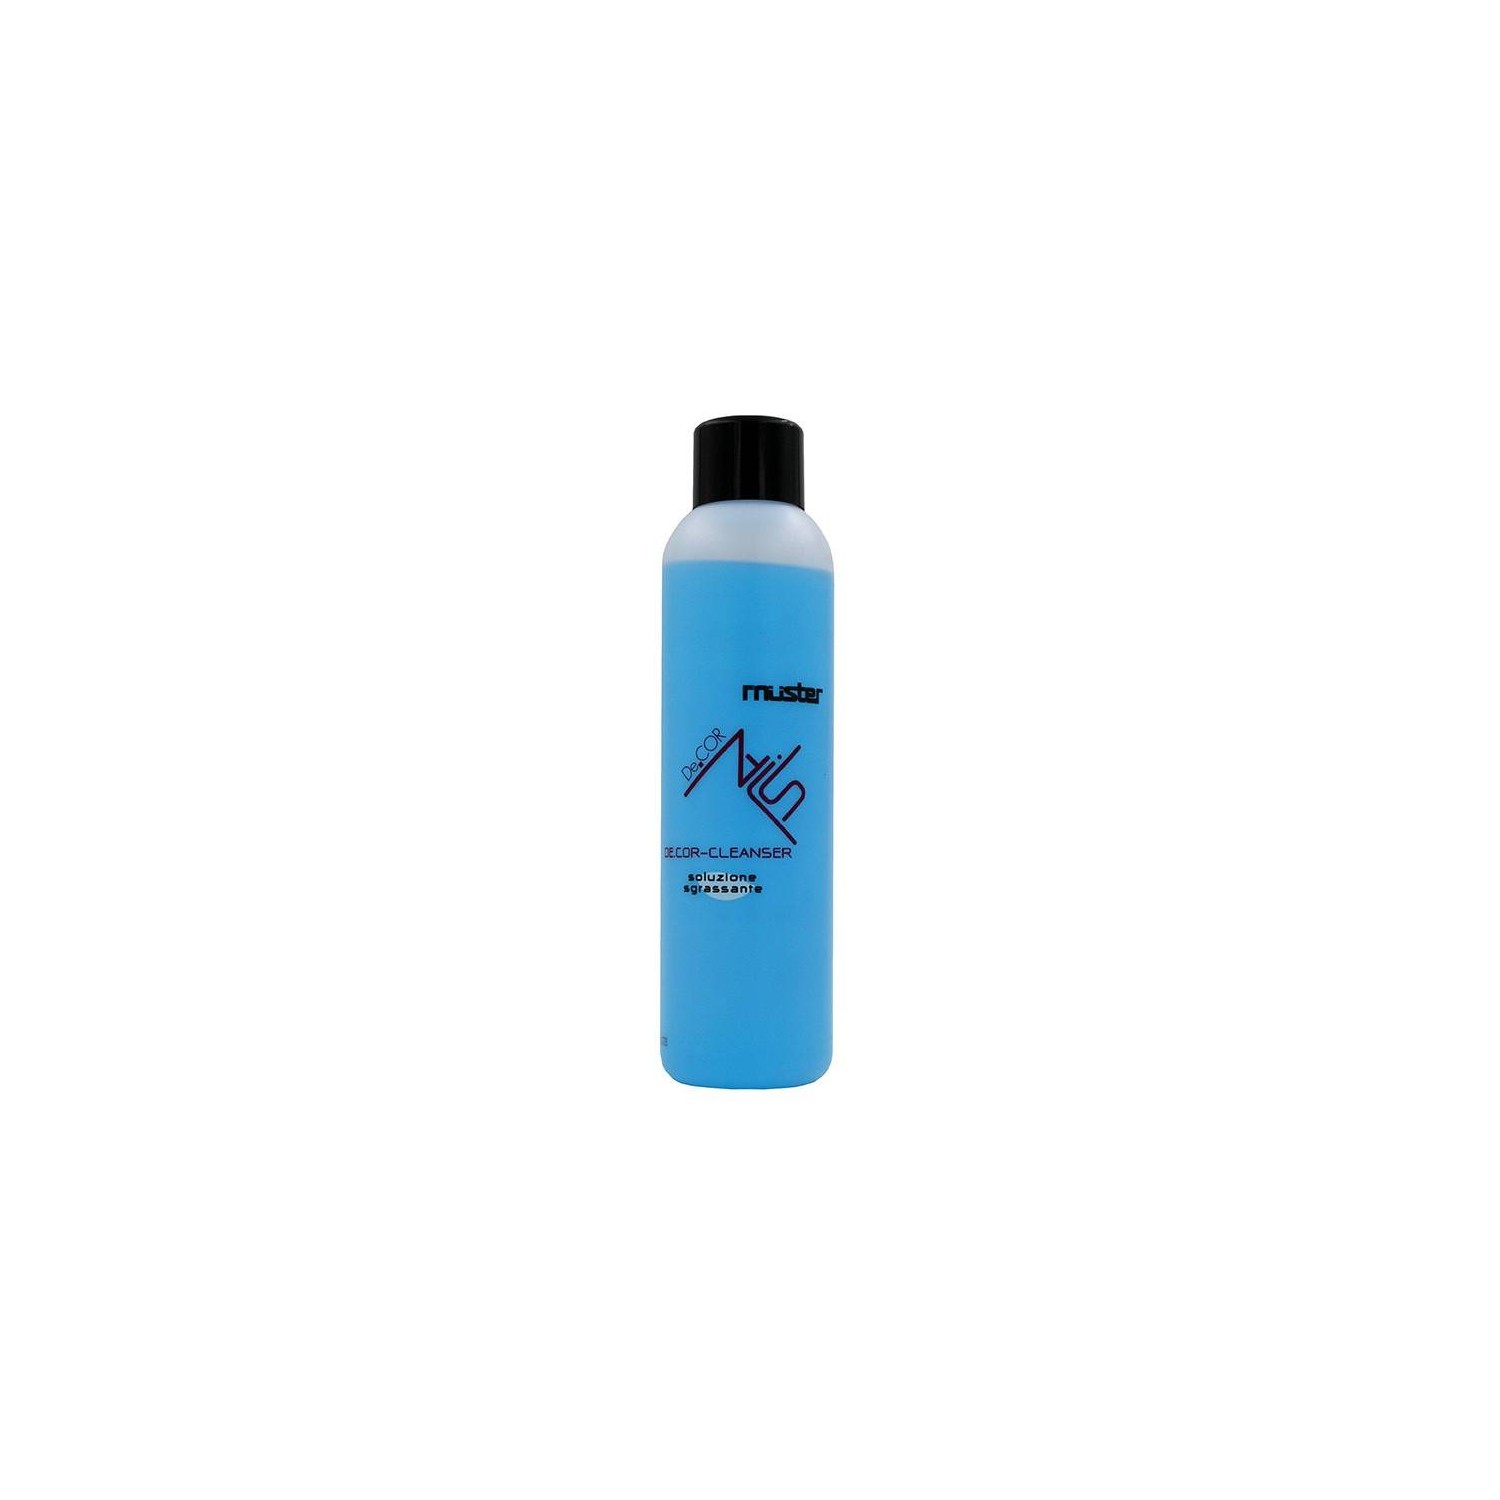 Muster Solutiondecor-cleans Nails 500 Ml